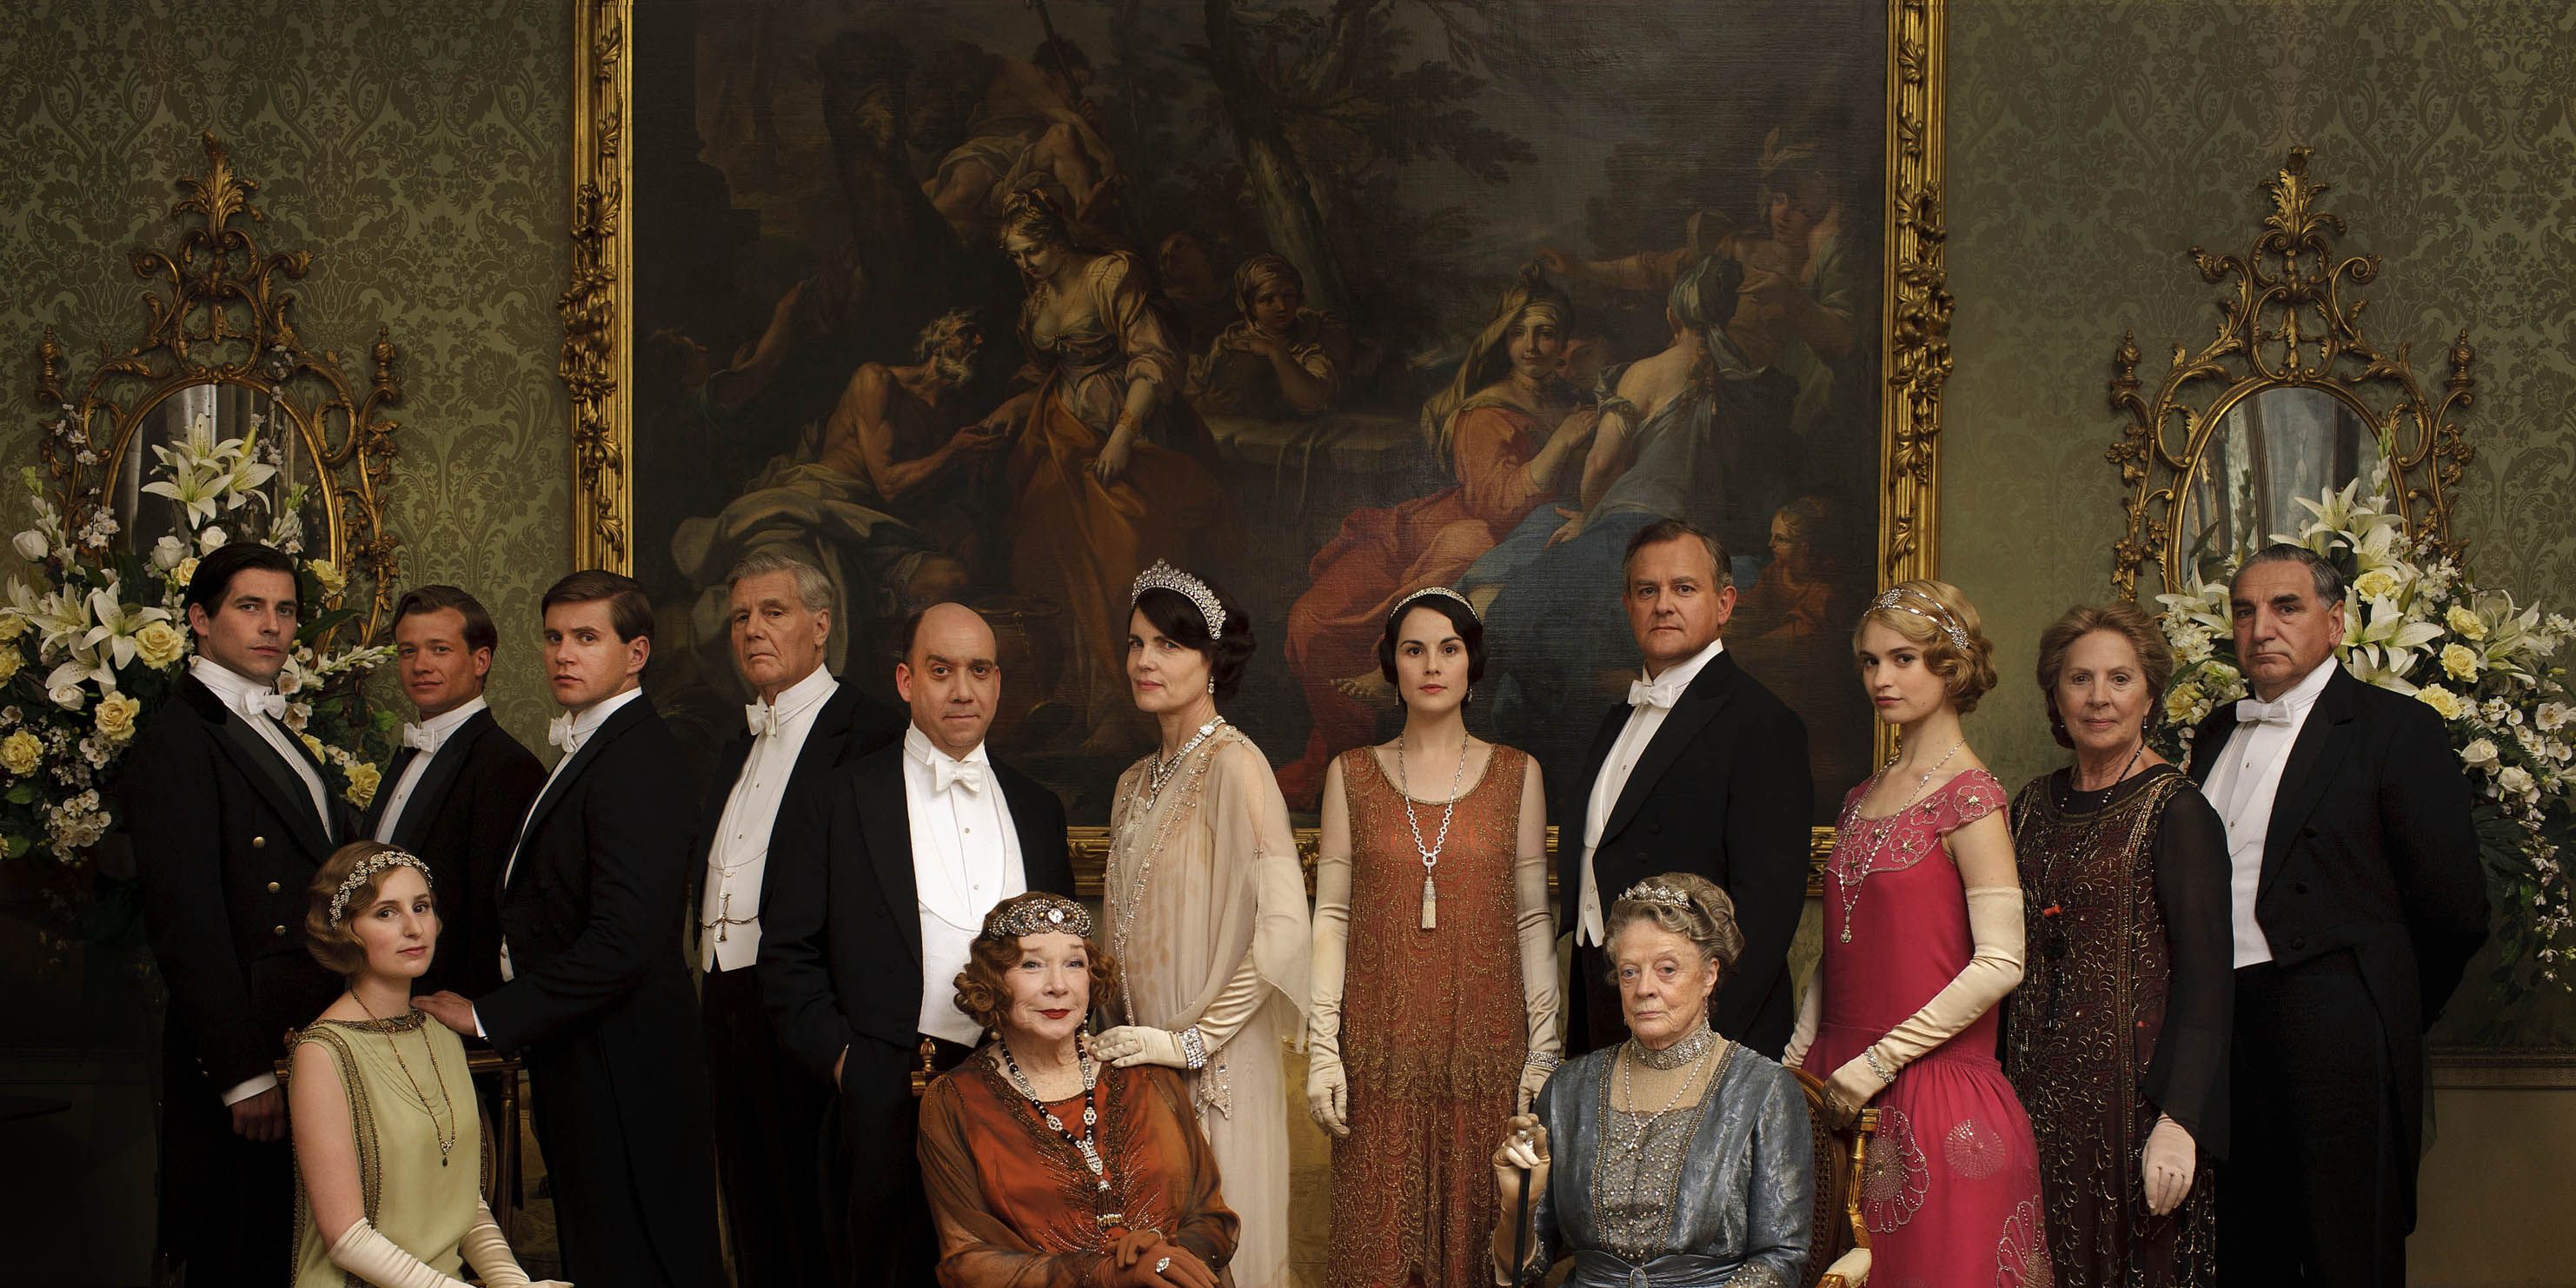 purchase downton abbey christmas special